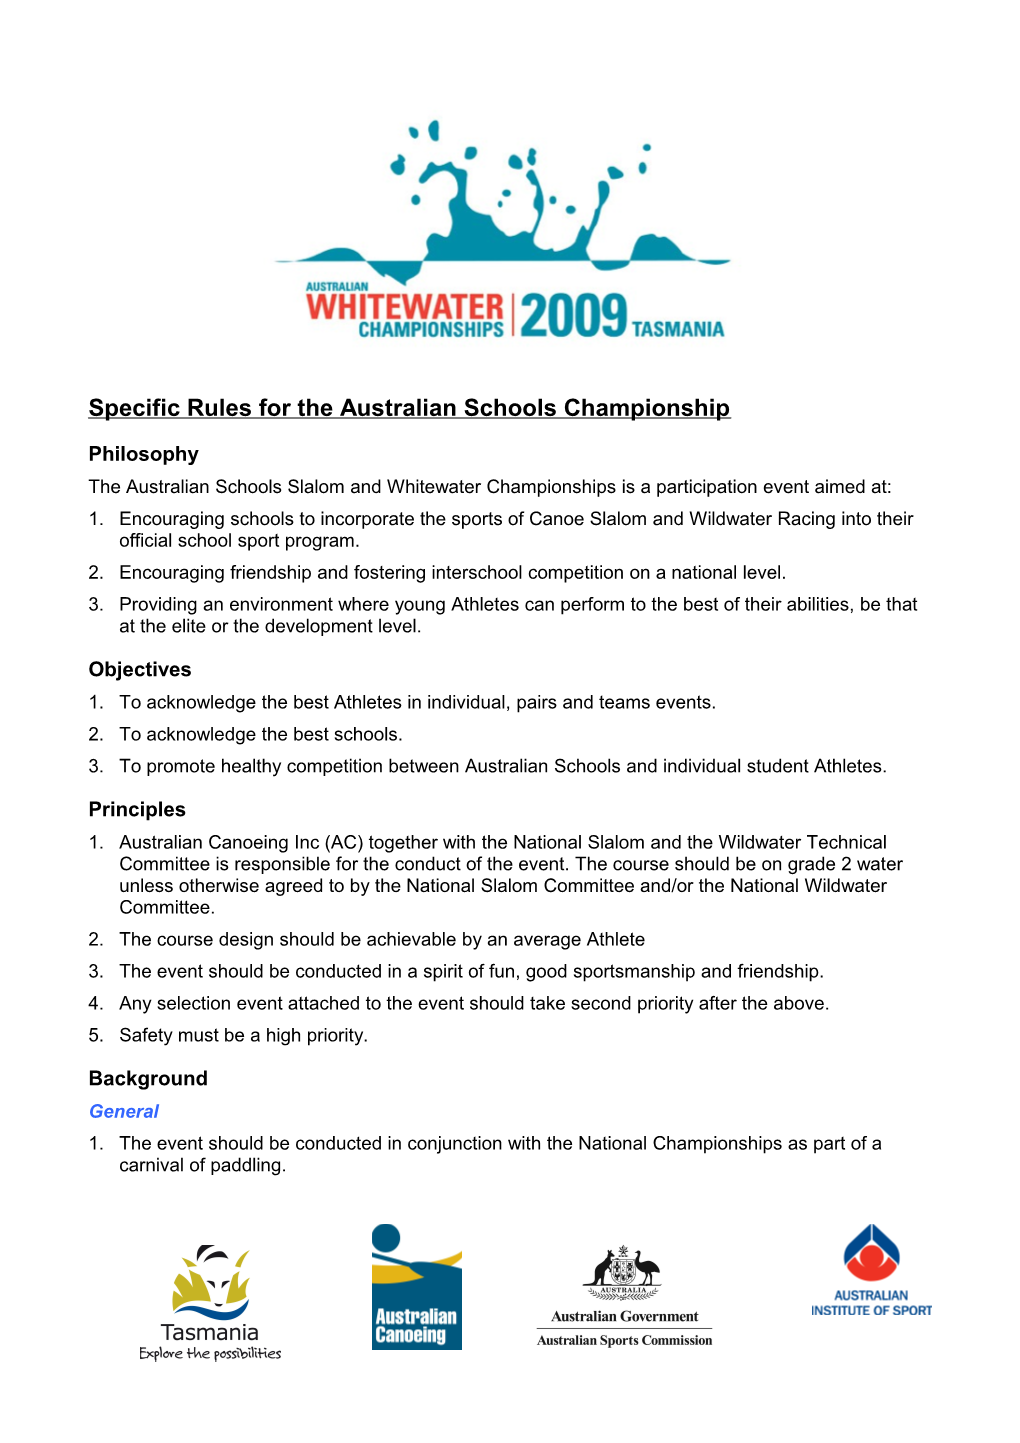 Specific Rules for the Australian Schools Championship